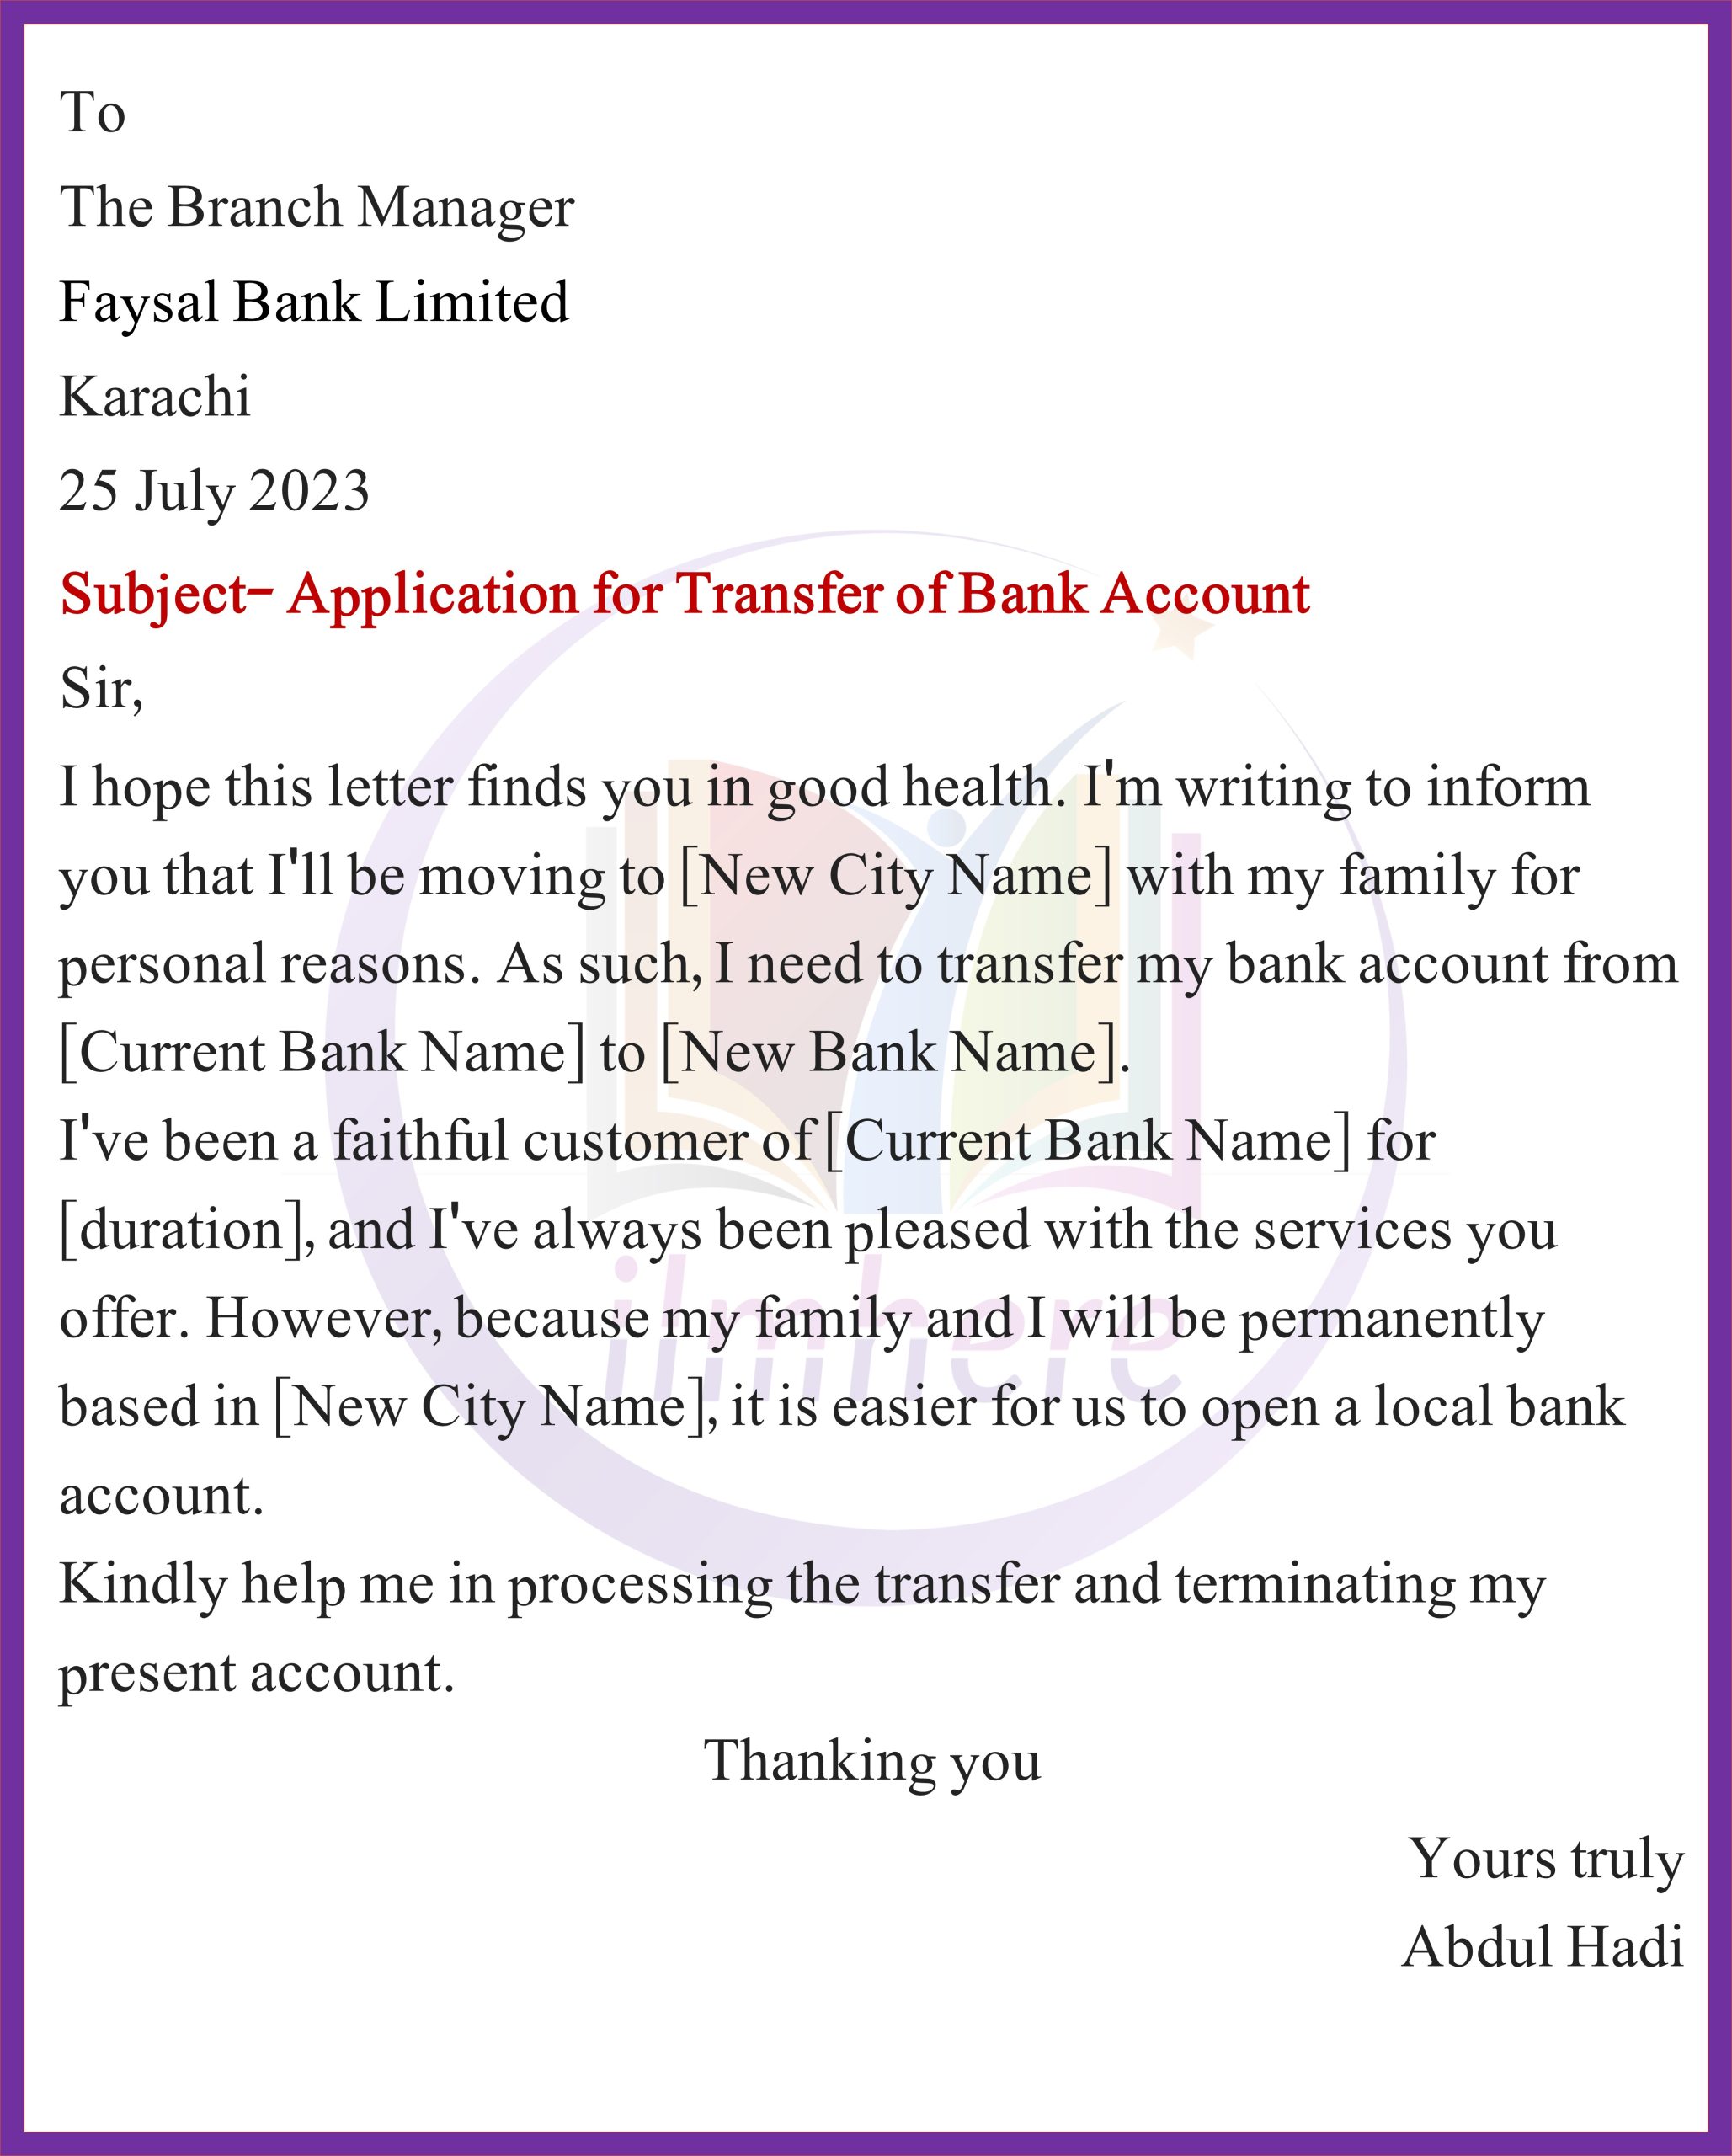 Request for Bank Account Transfer Due to Family Relocation (FBL)